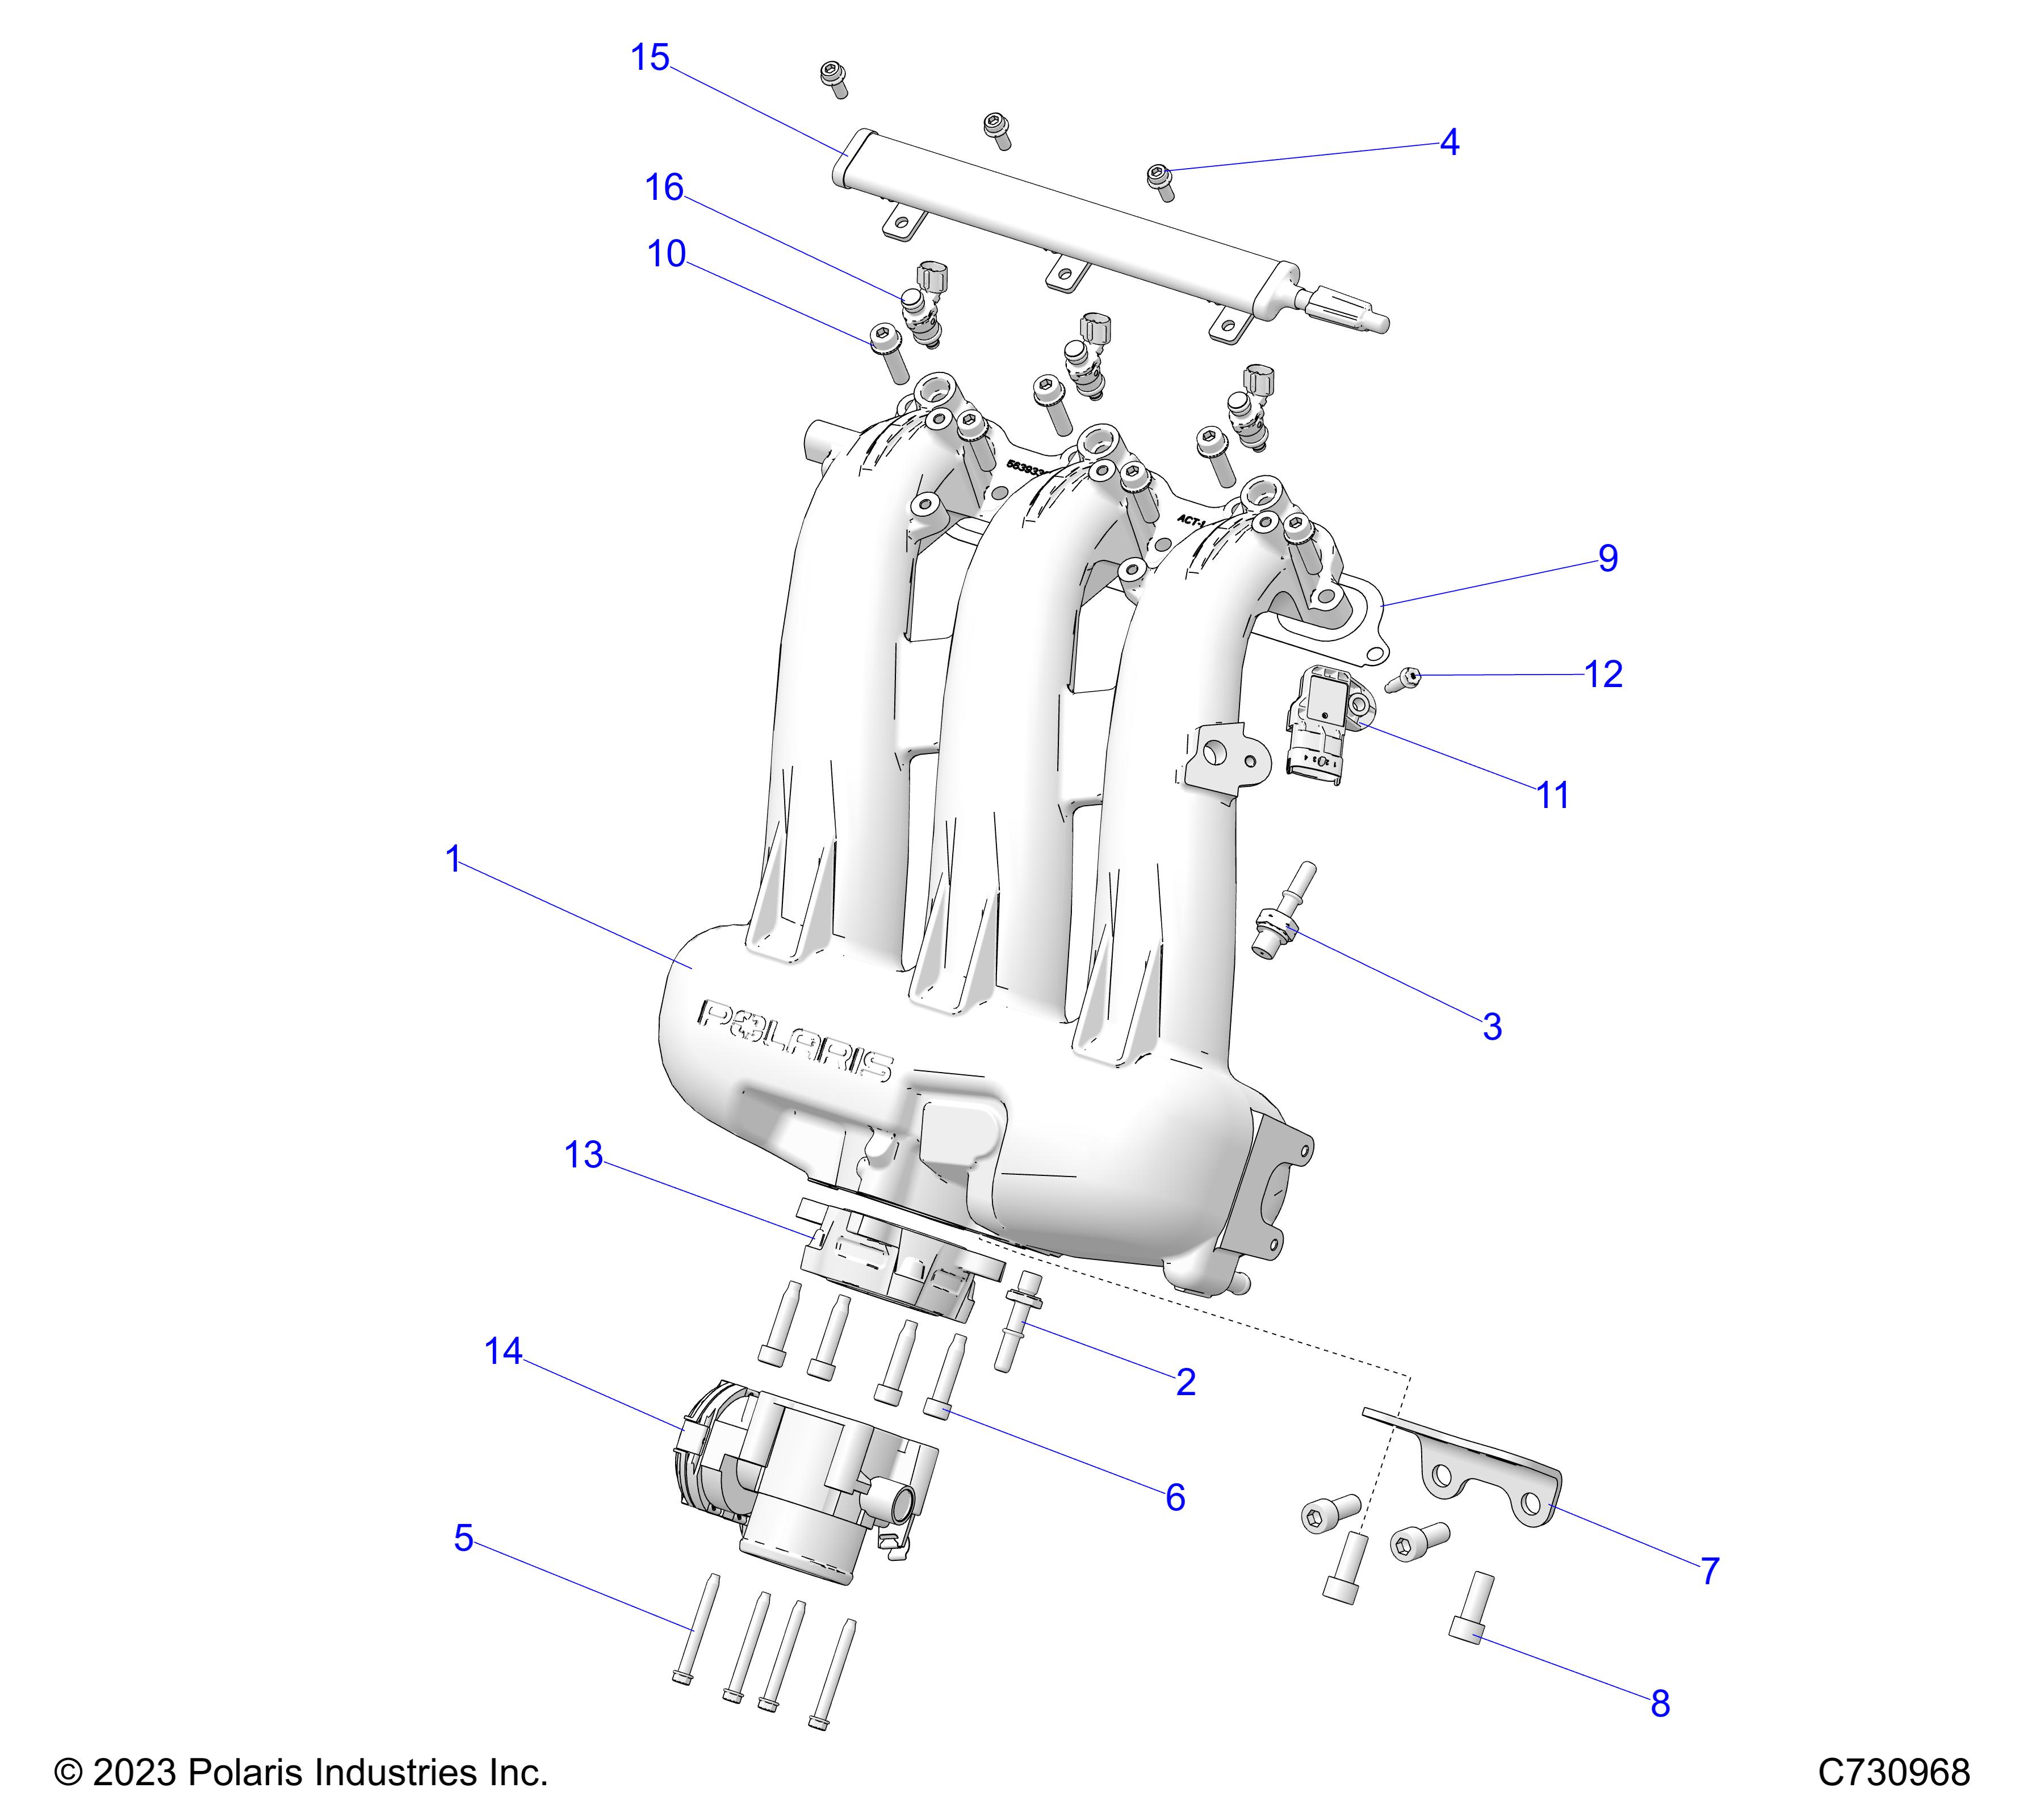 Part Number : 5144752 FITTING-PCV